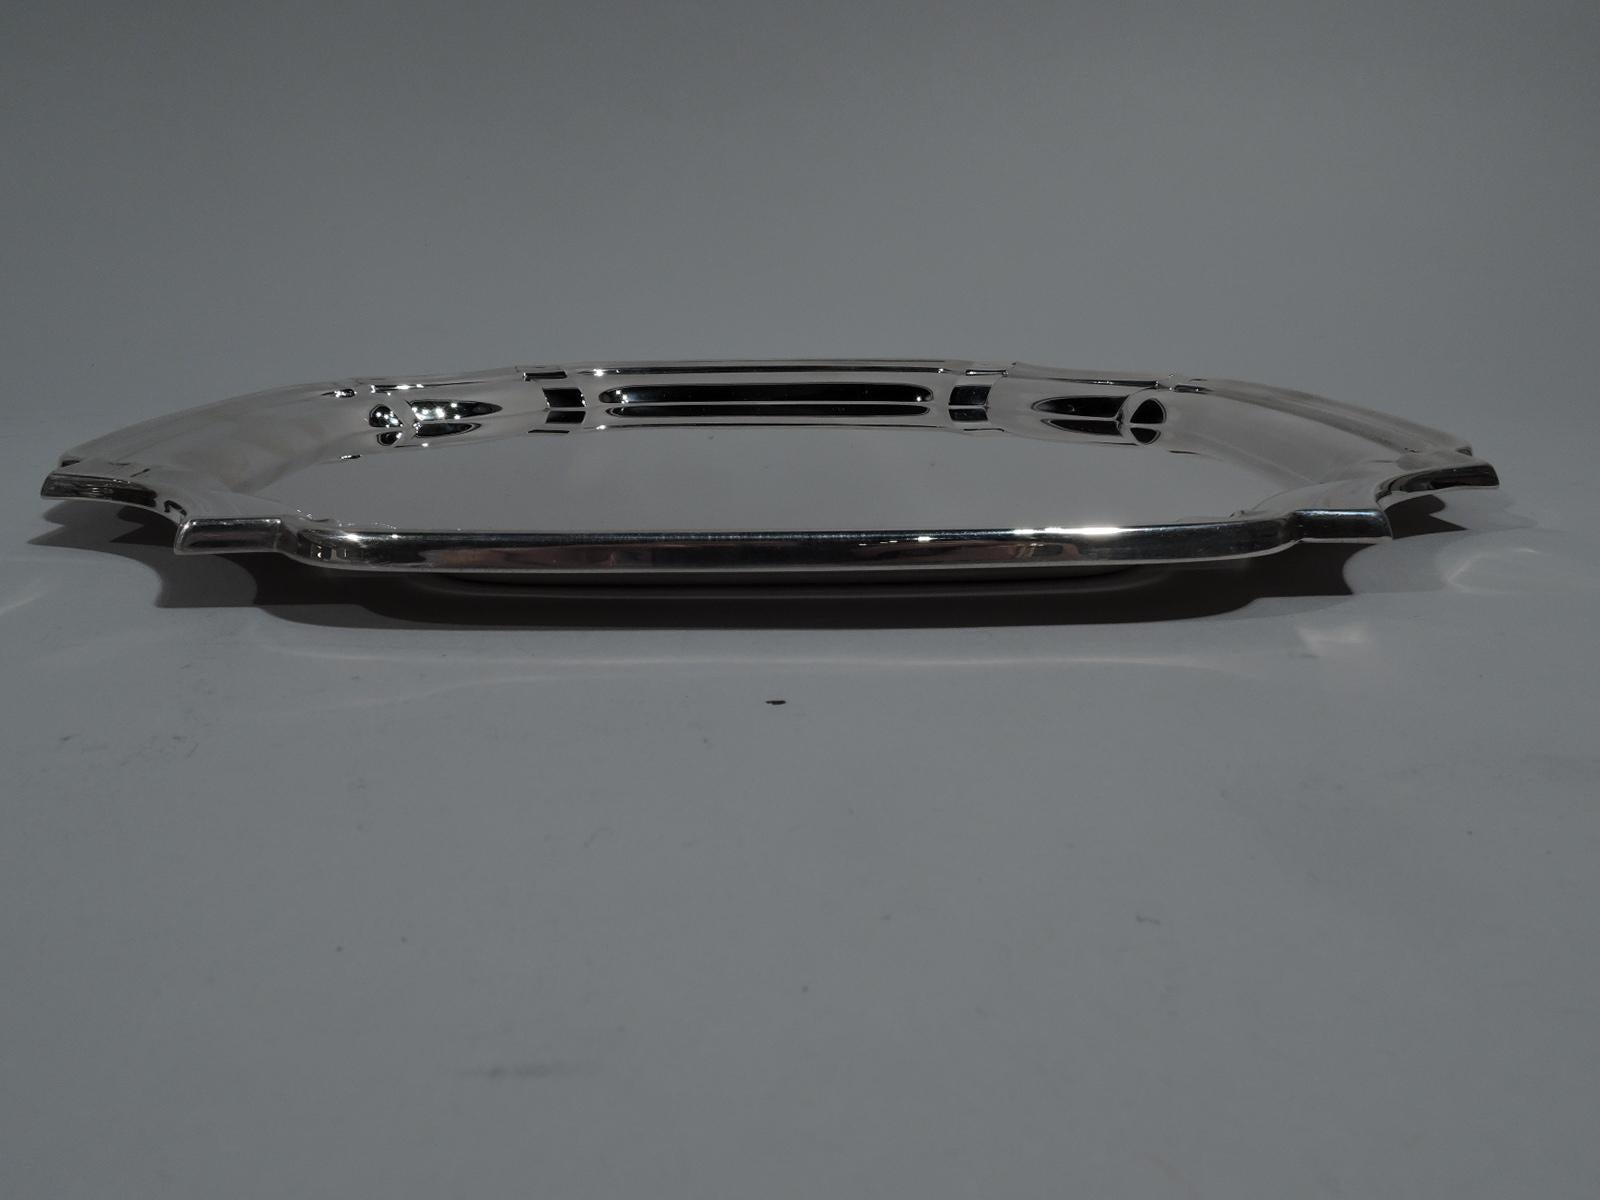 Georgian-style sterling silver tray. Made by Lunt in Greenfield, Mass. Four curved sides and curvilinear concave corners. Molded rim. A nice traditional serving piece. Fully marked and numbered S3S. Weight: 16 troy ounces.